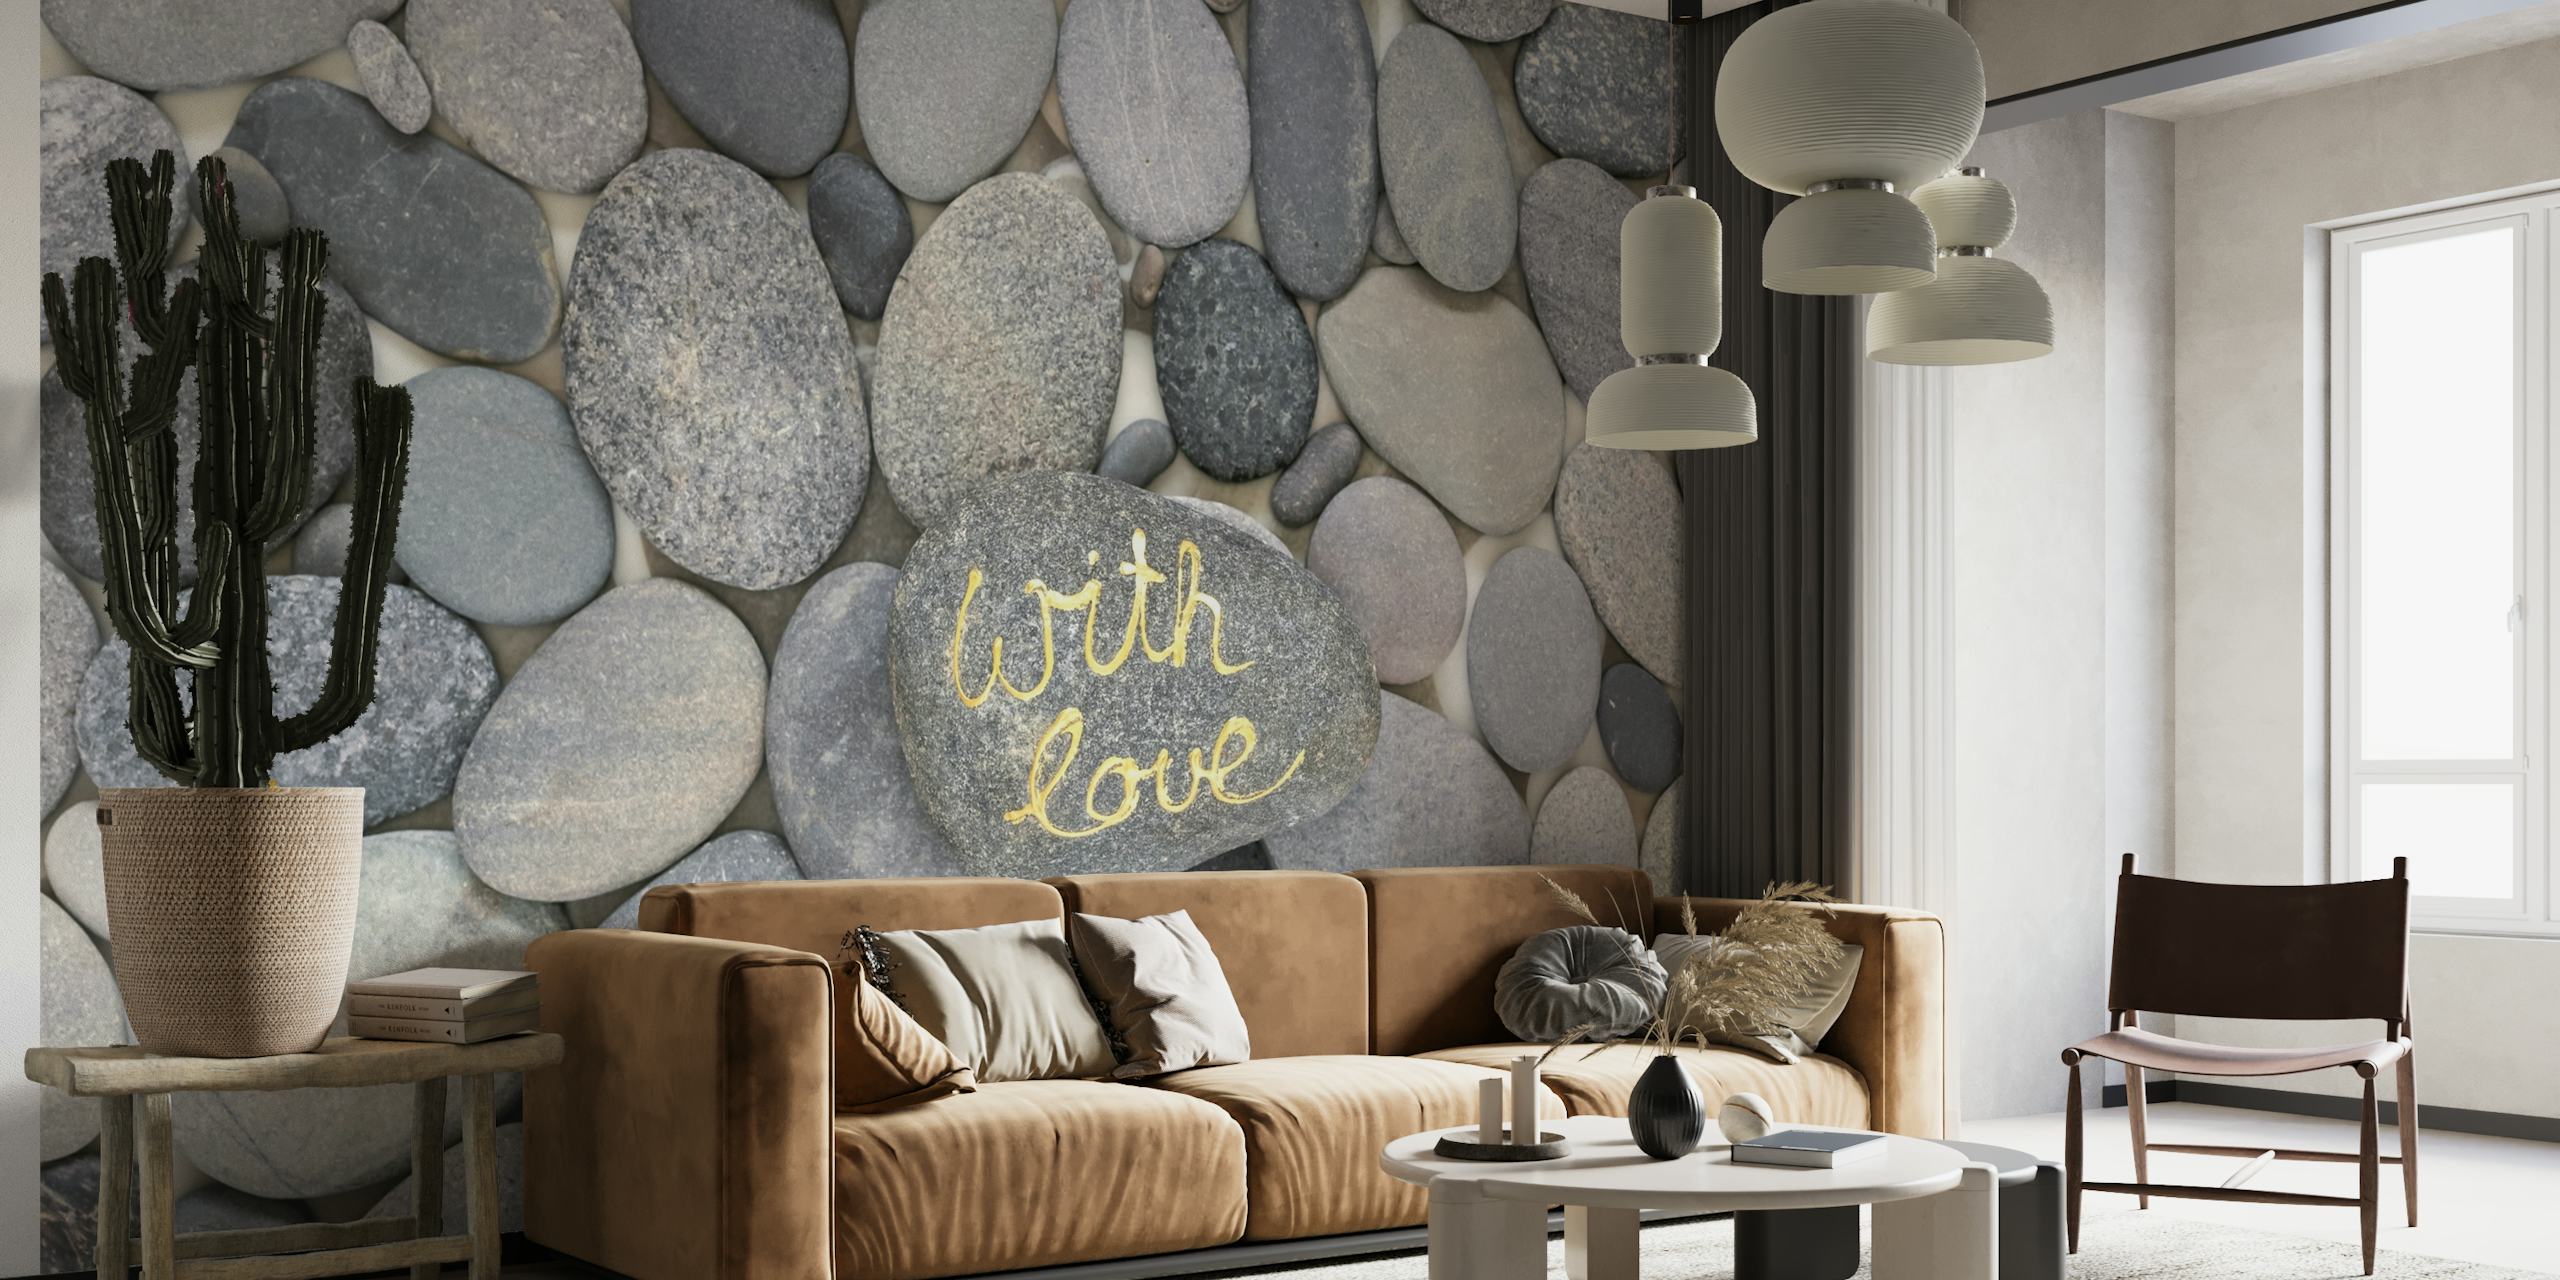 Pebble background with a gold inscription 'with love' for wall mural decor